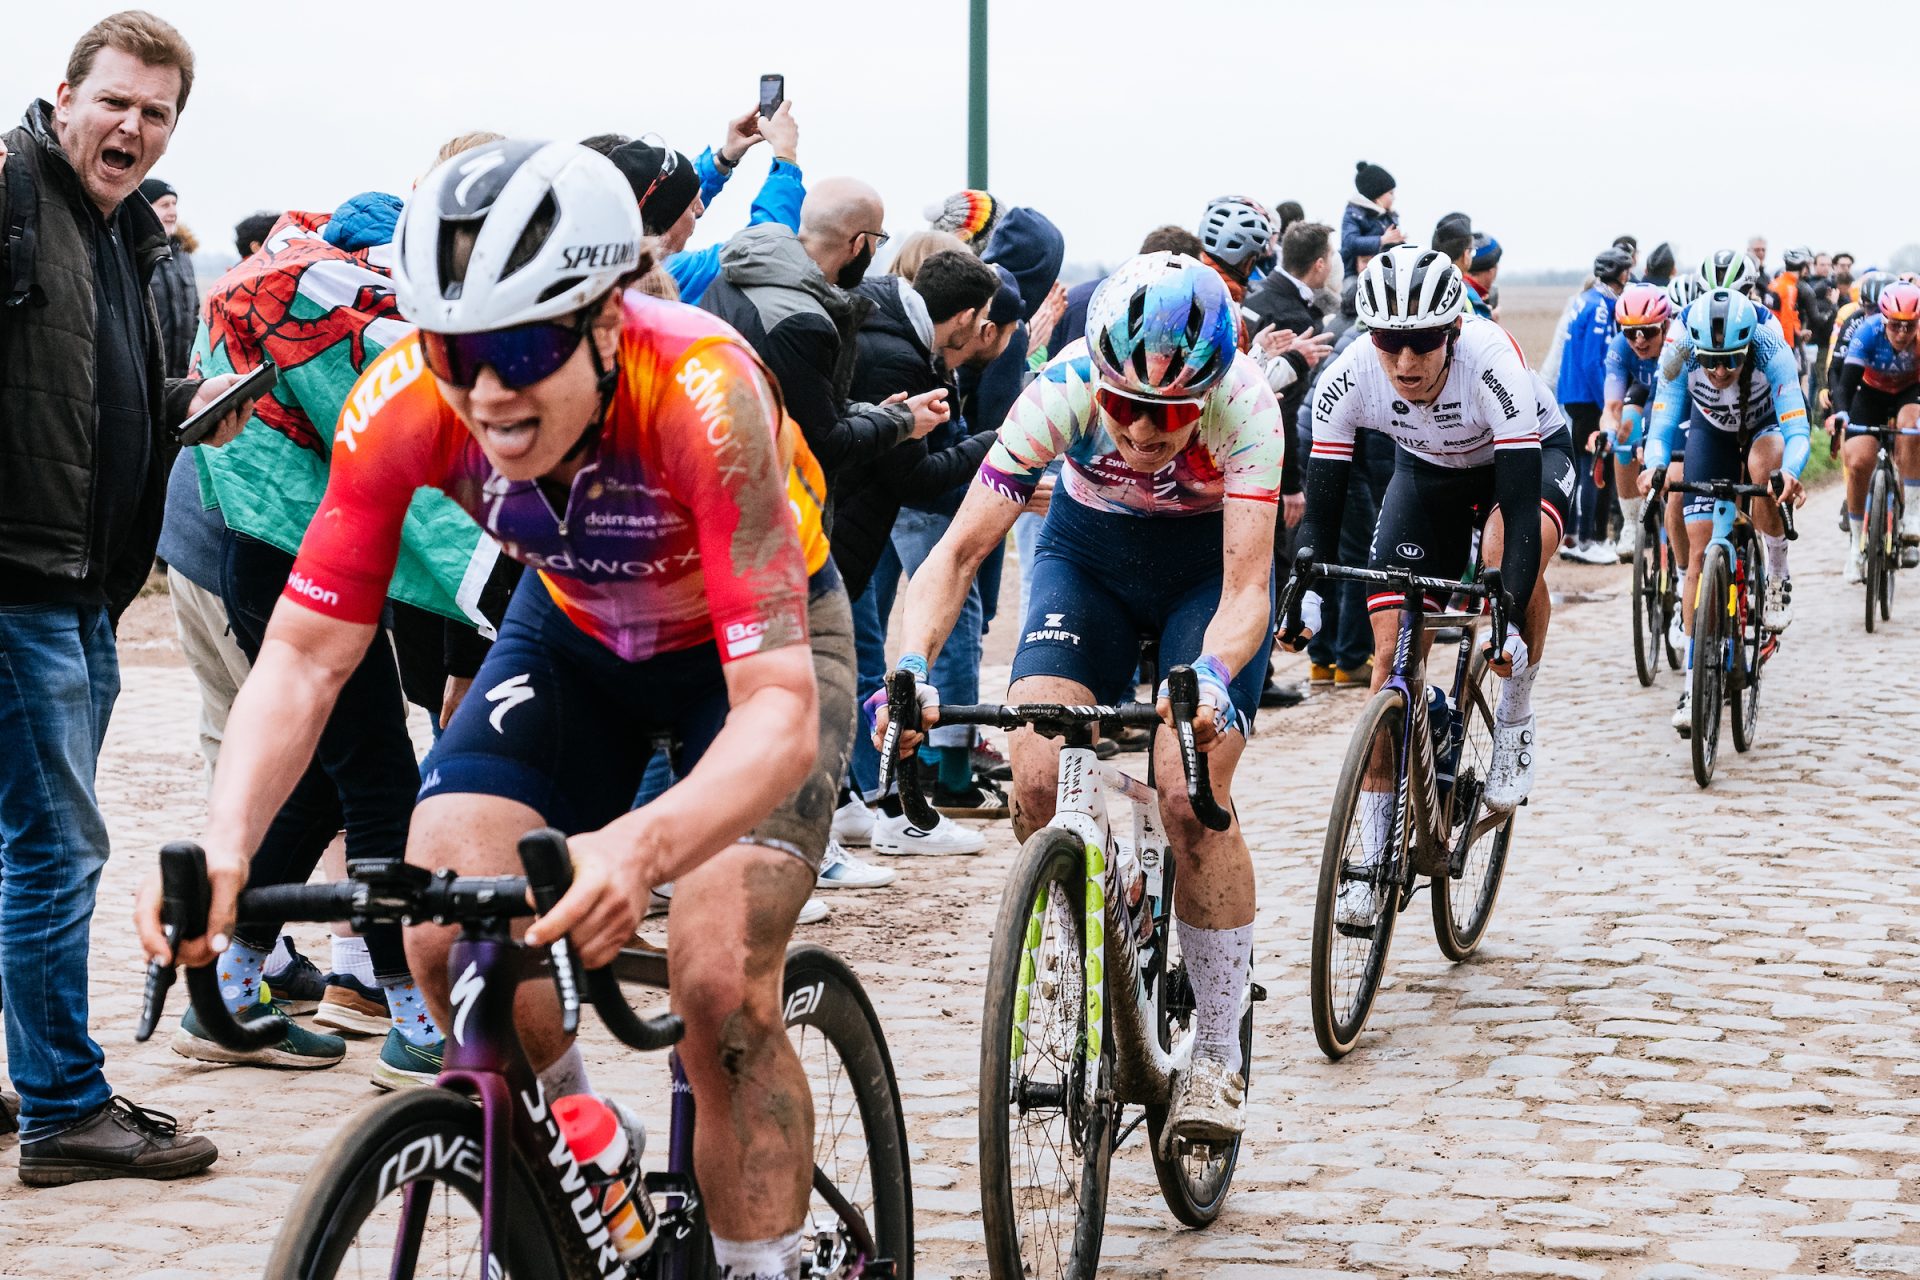 A tight shot of riders powering over the cobbles of the 2023 Paris Roubaix Femmes. The pack is stretched out, with multiple bike length gaps opening. Fans dressed in coats and rain jackets flank the side of the road.